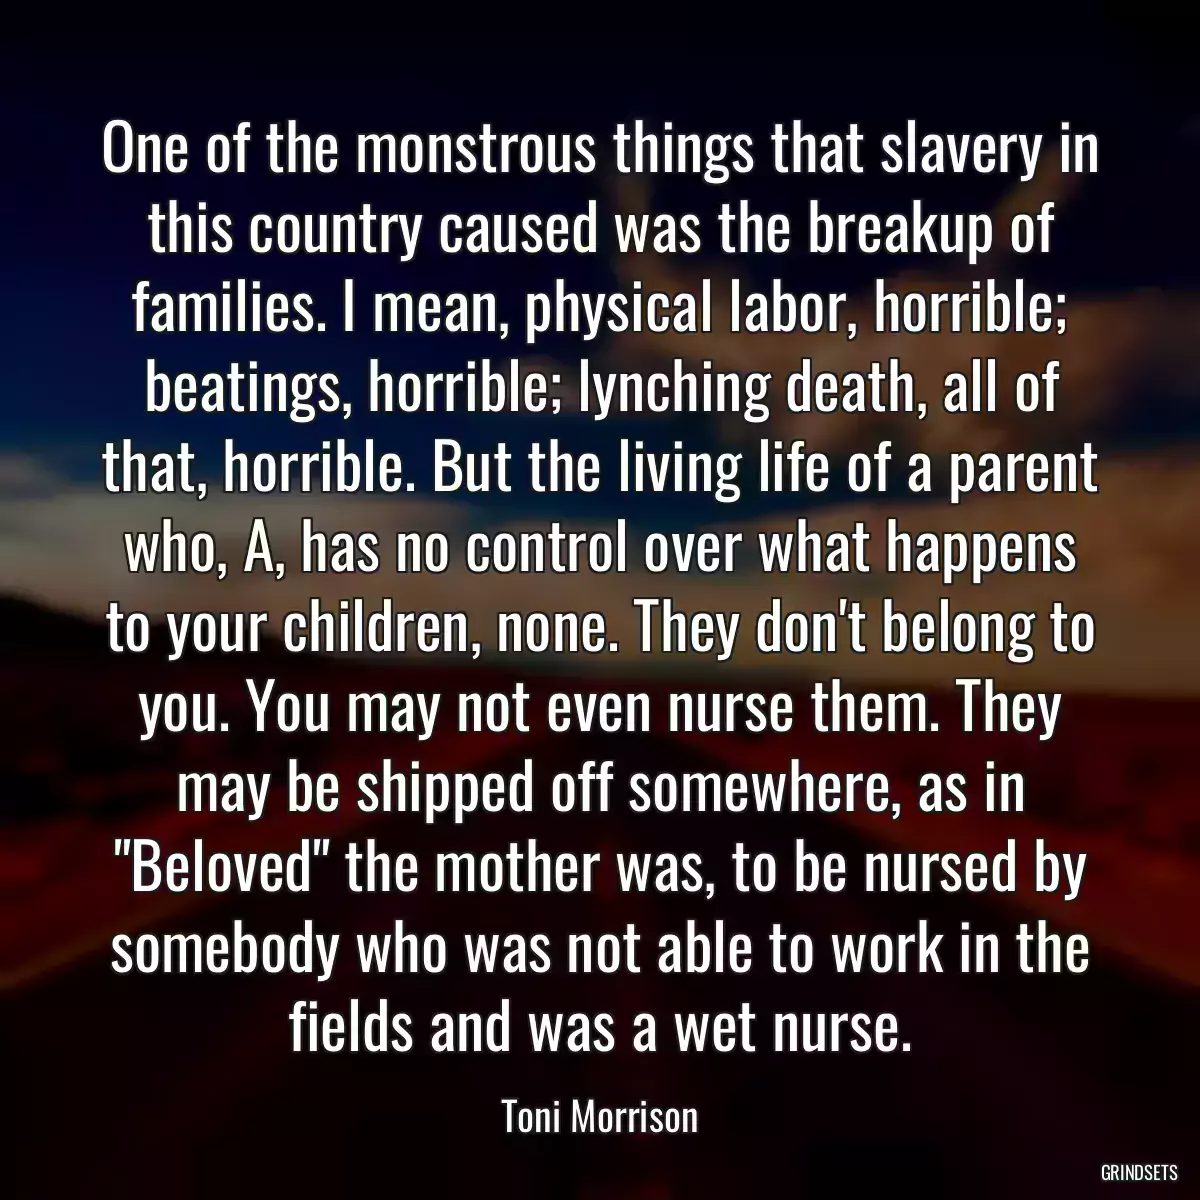 One of the monstrous things that slavery in this country caused was the breakup of families. I mean, physical labor, horrible; beatings, horrible; lynching death, all of that, horrible. But the living life of a parent who, A, has no control over what happens to your children, none. They don\'t belong to you. You may not even nurse them. They may be shipped off somewhere, as in \